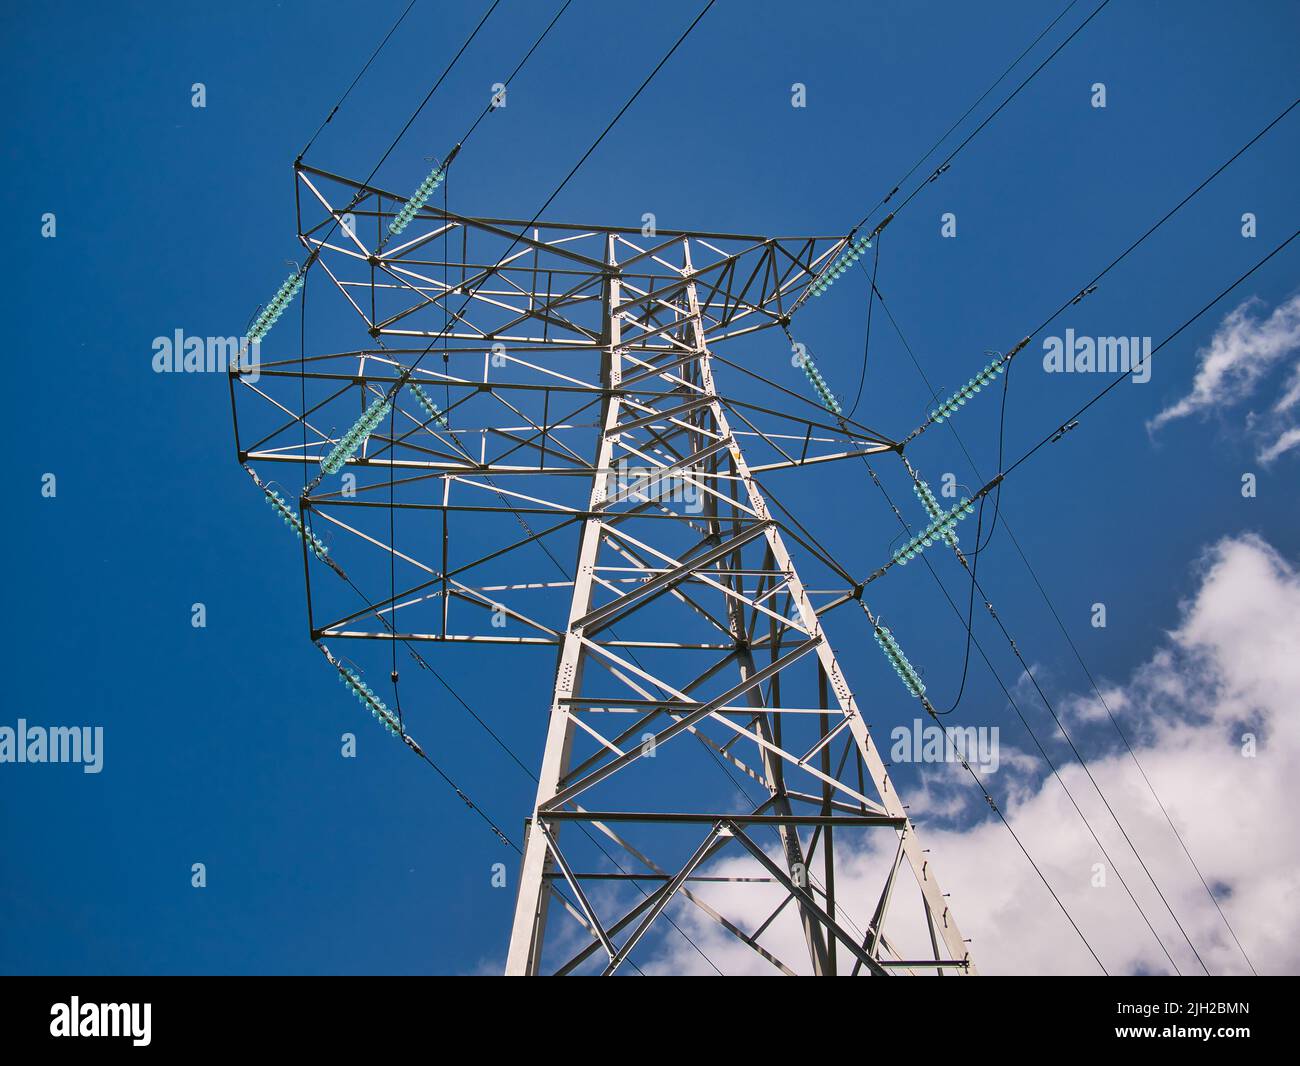 An electricity supply pylon delivering power through the UK national grid showing power cables, isolators and other equipment. Stock Photo